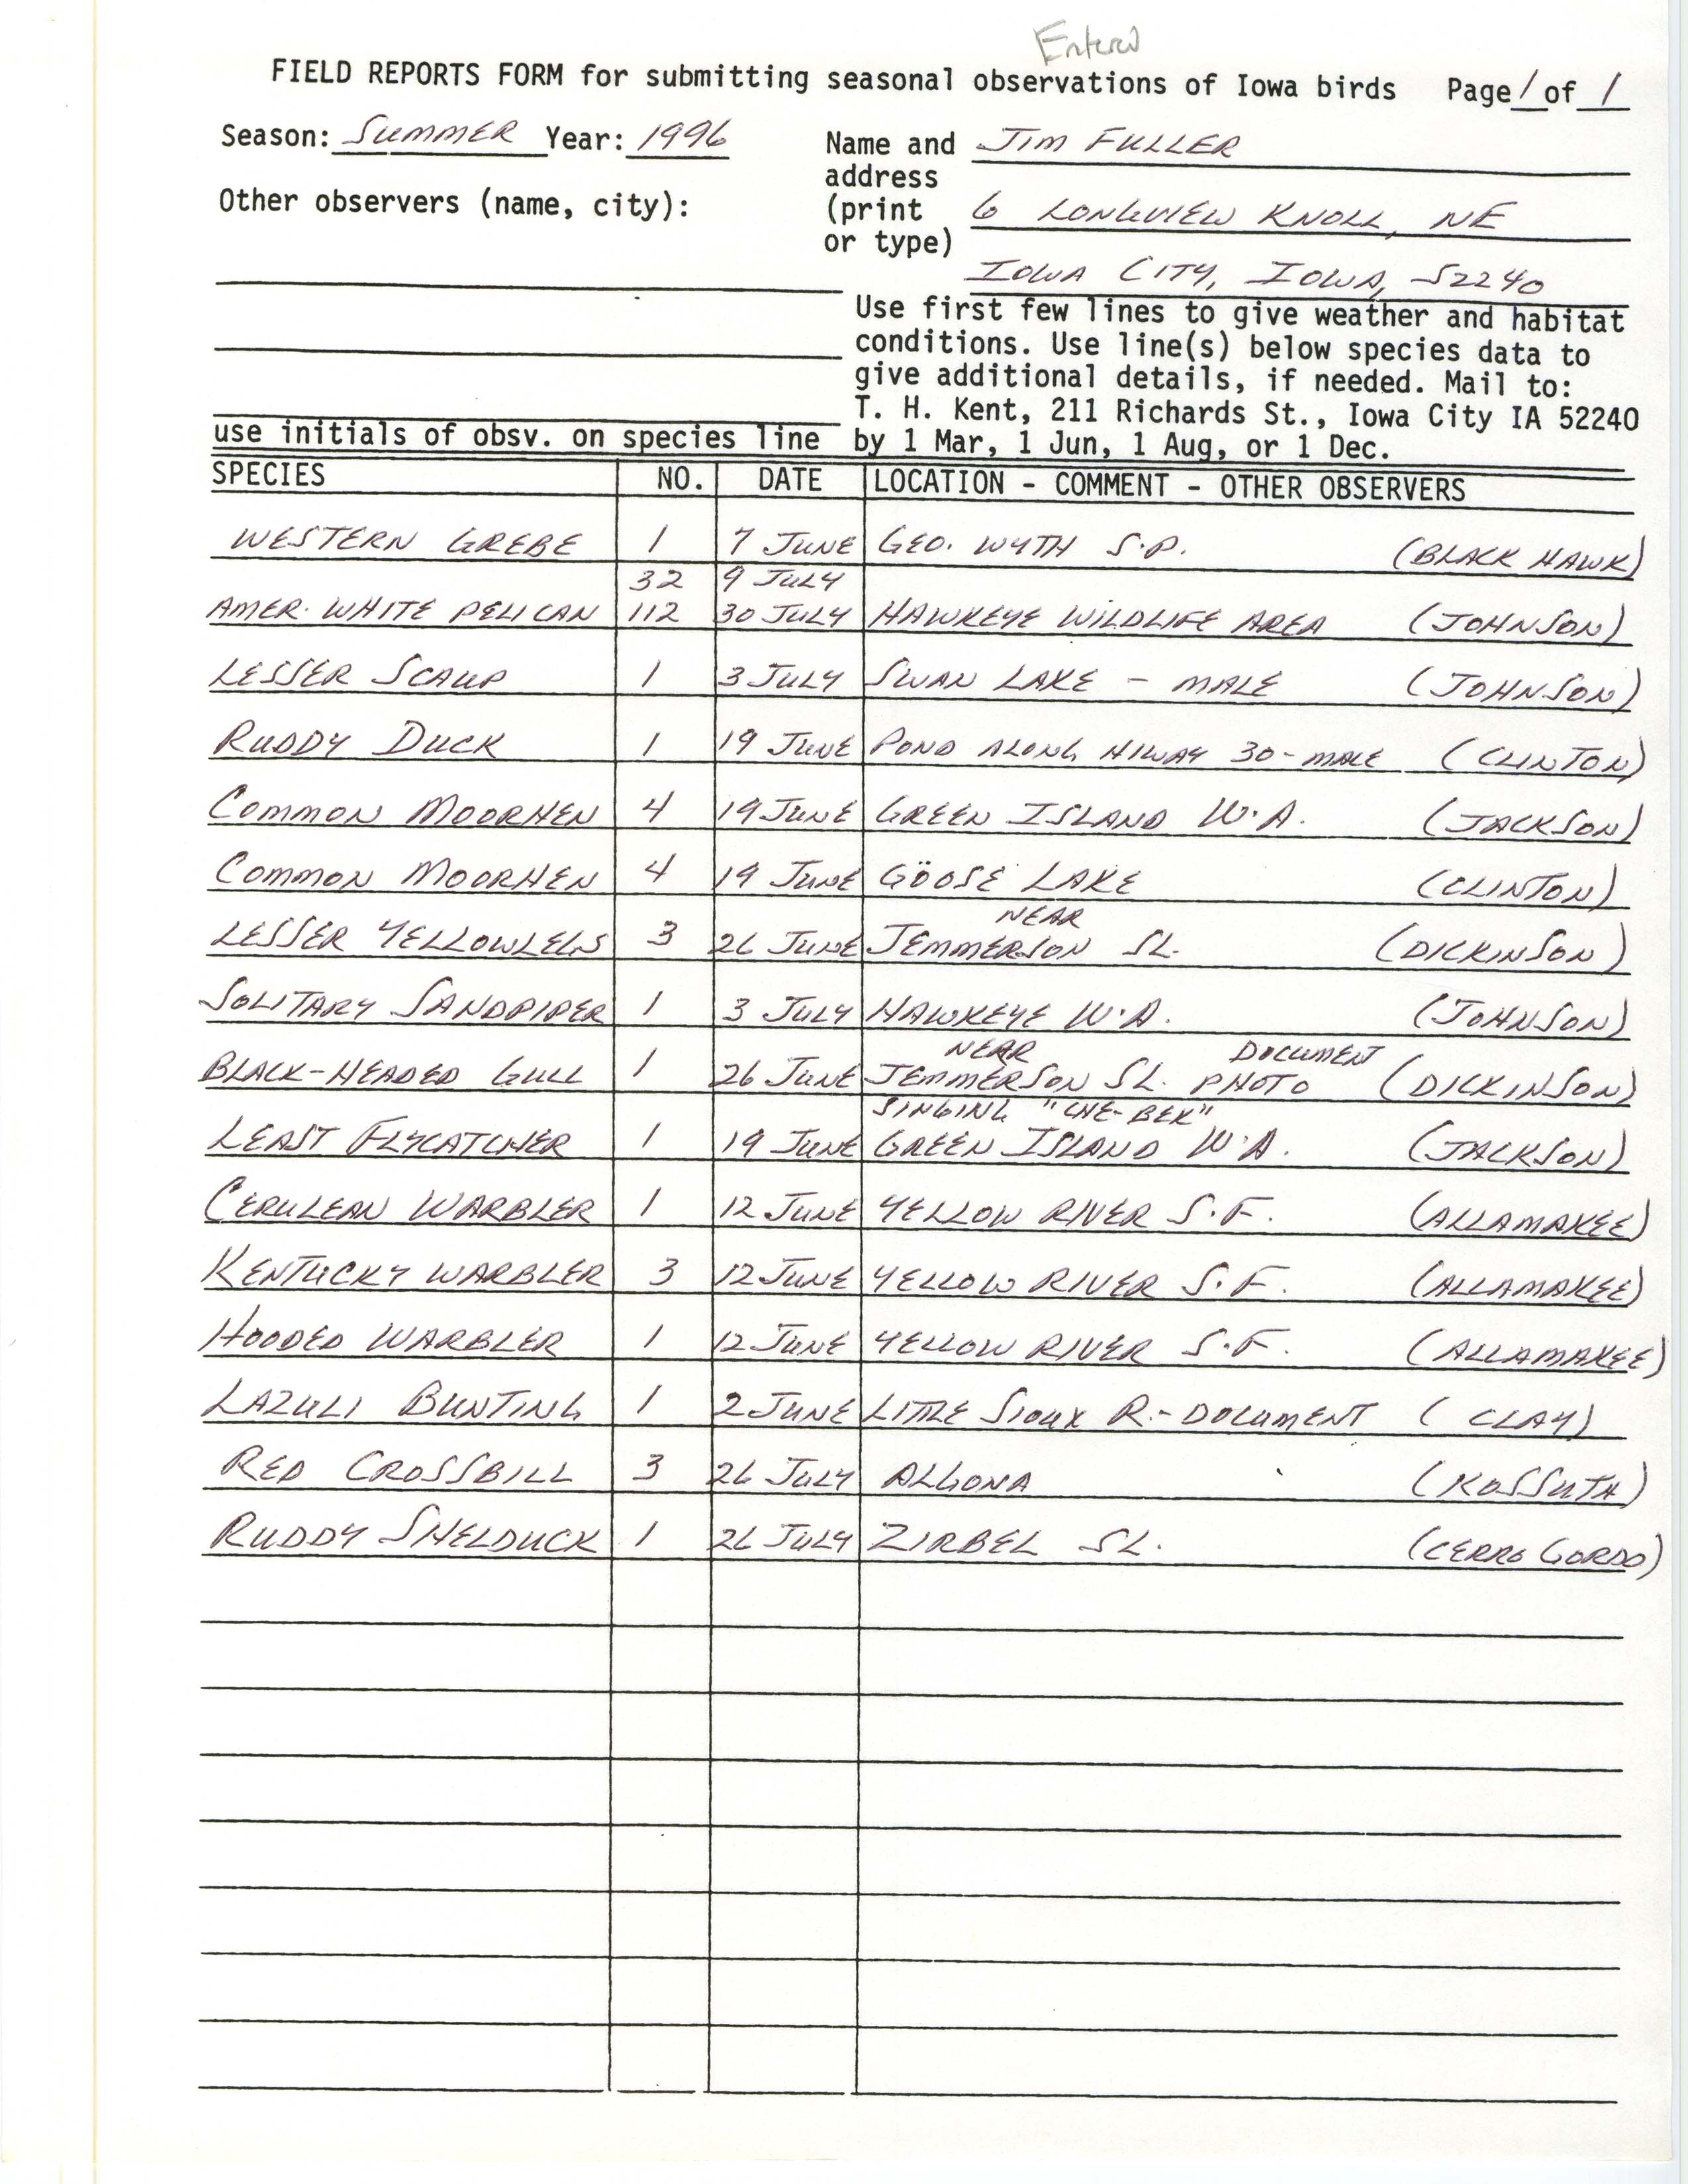 Field reports form for submitting seasonal observations of Iowa birds, James L. Fuller, summer 1996